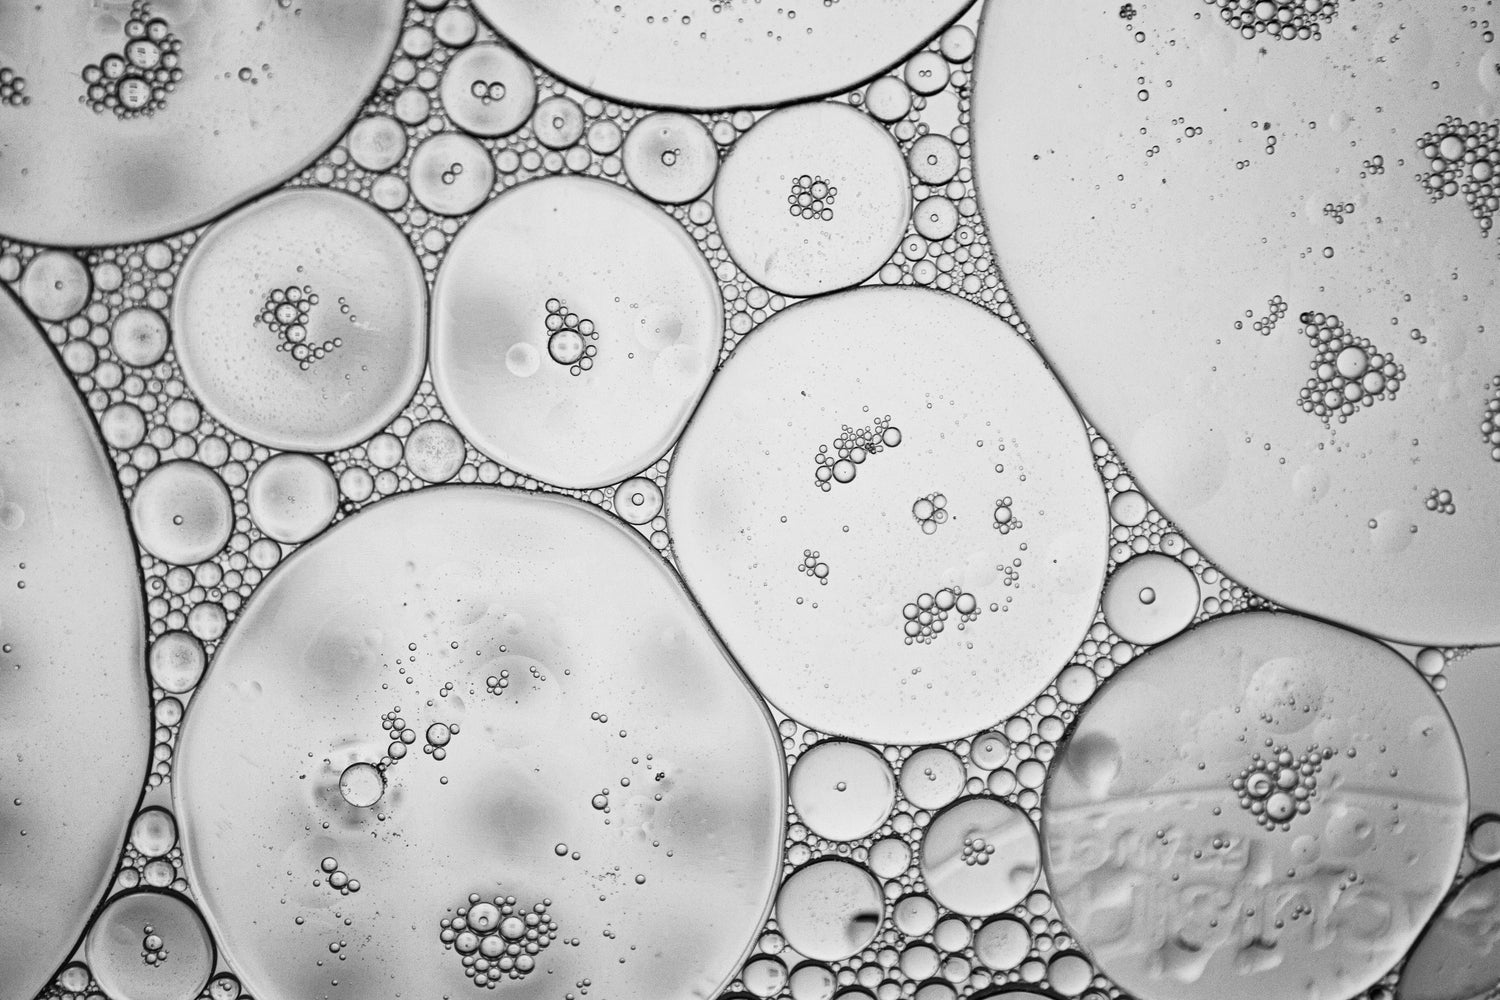 Microscopic view of bubbles and fluid, showcasing intricate patterns and scientific beauty.